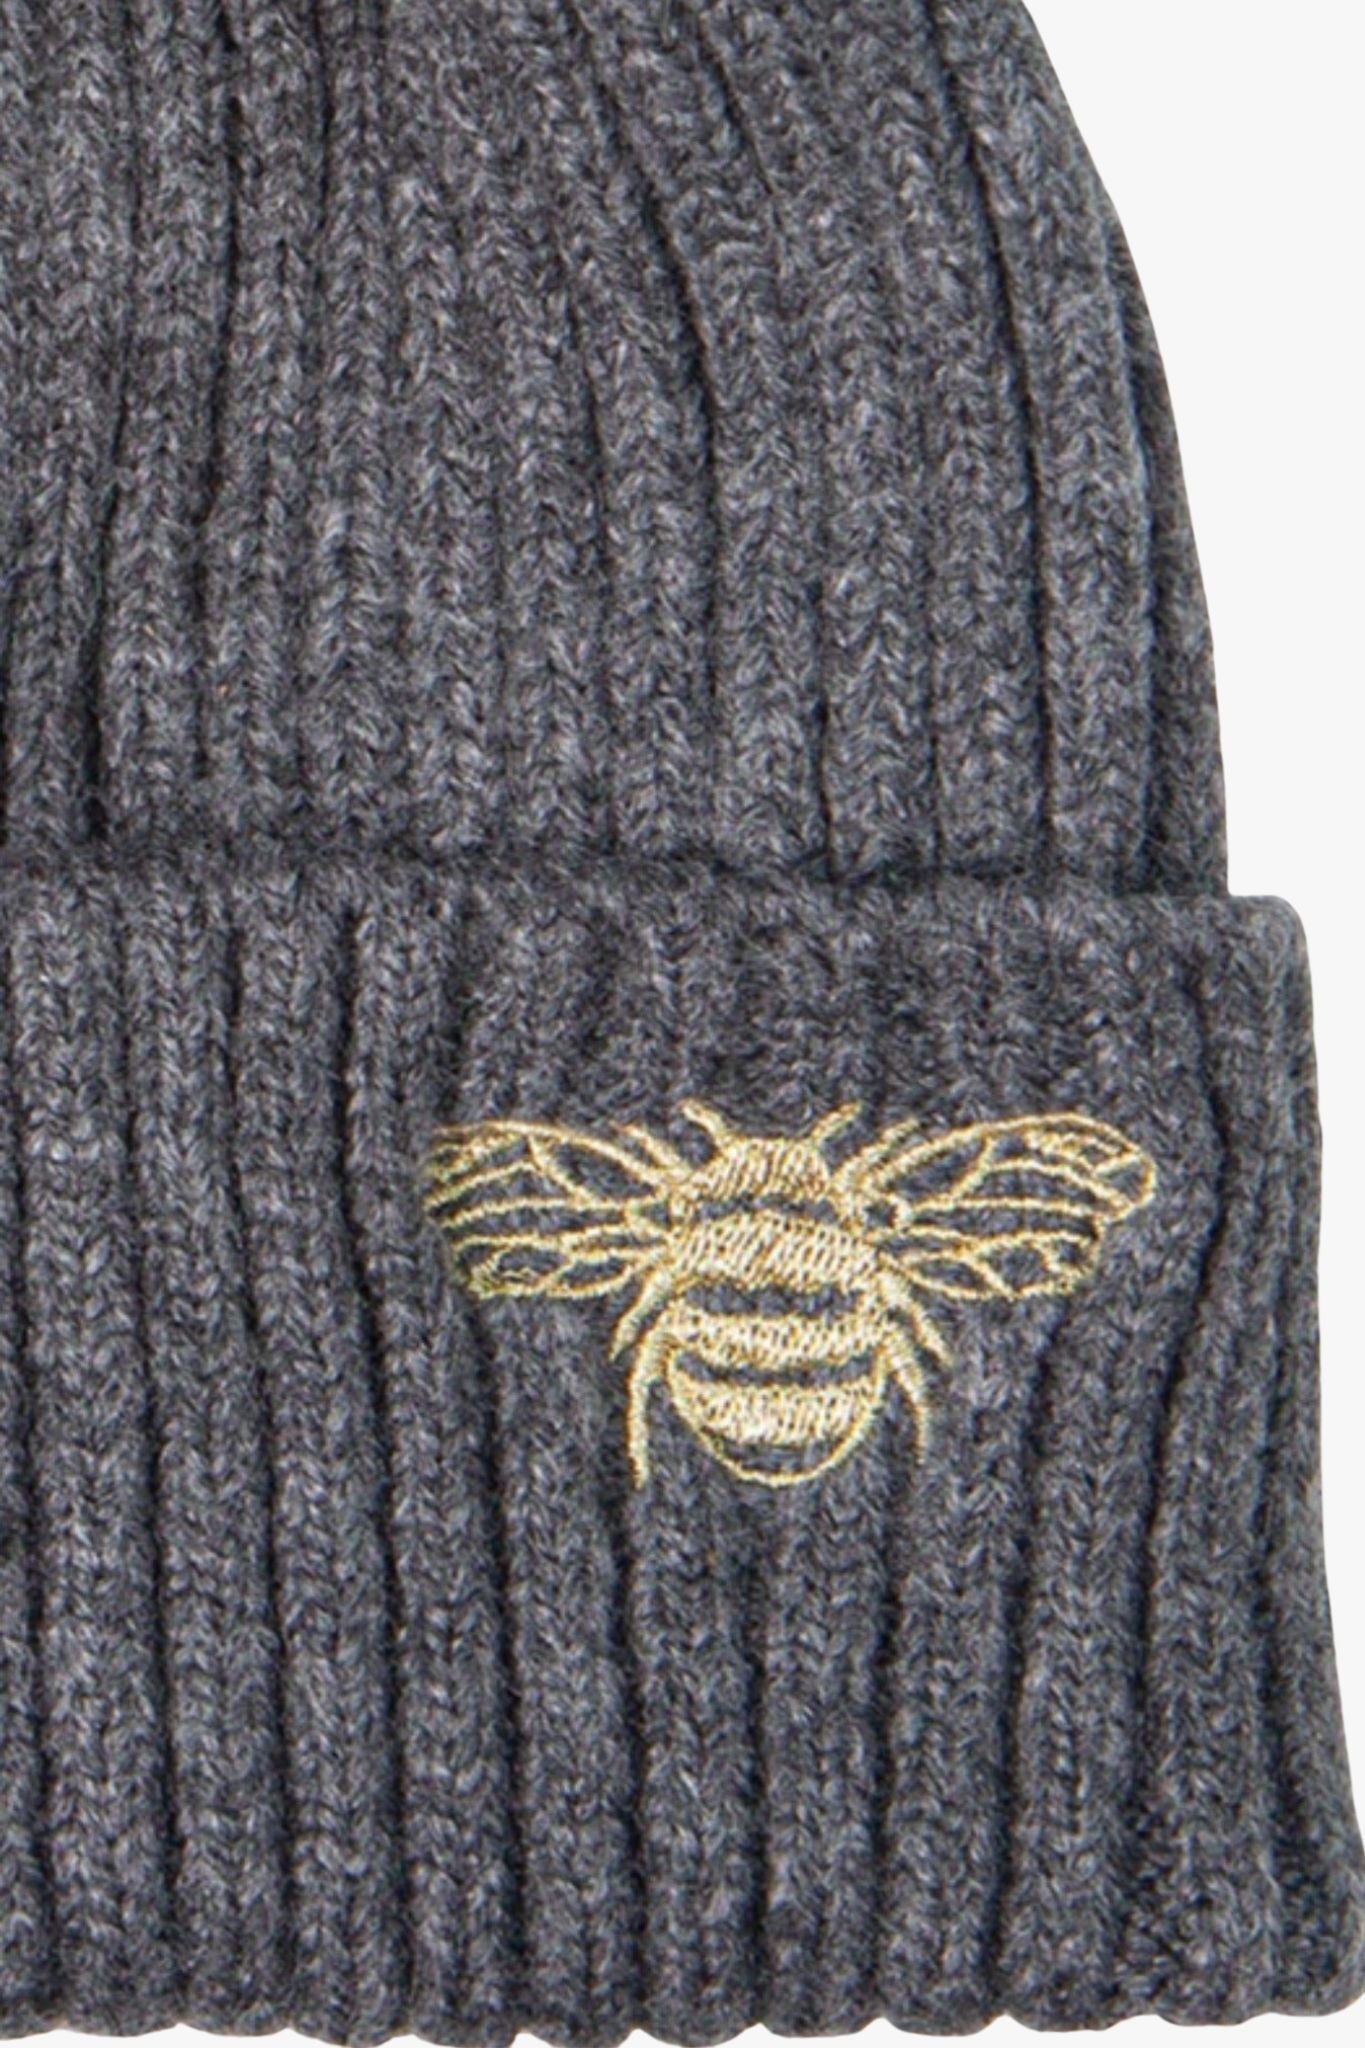 close up of the emboridered bee and ribbed knitted fabric